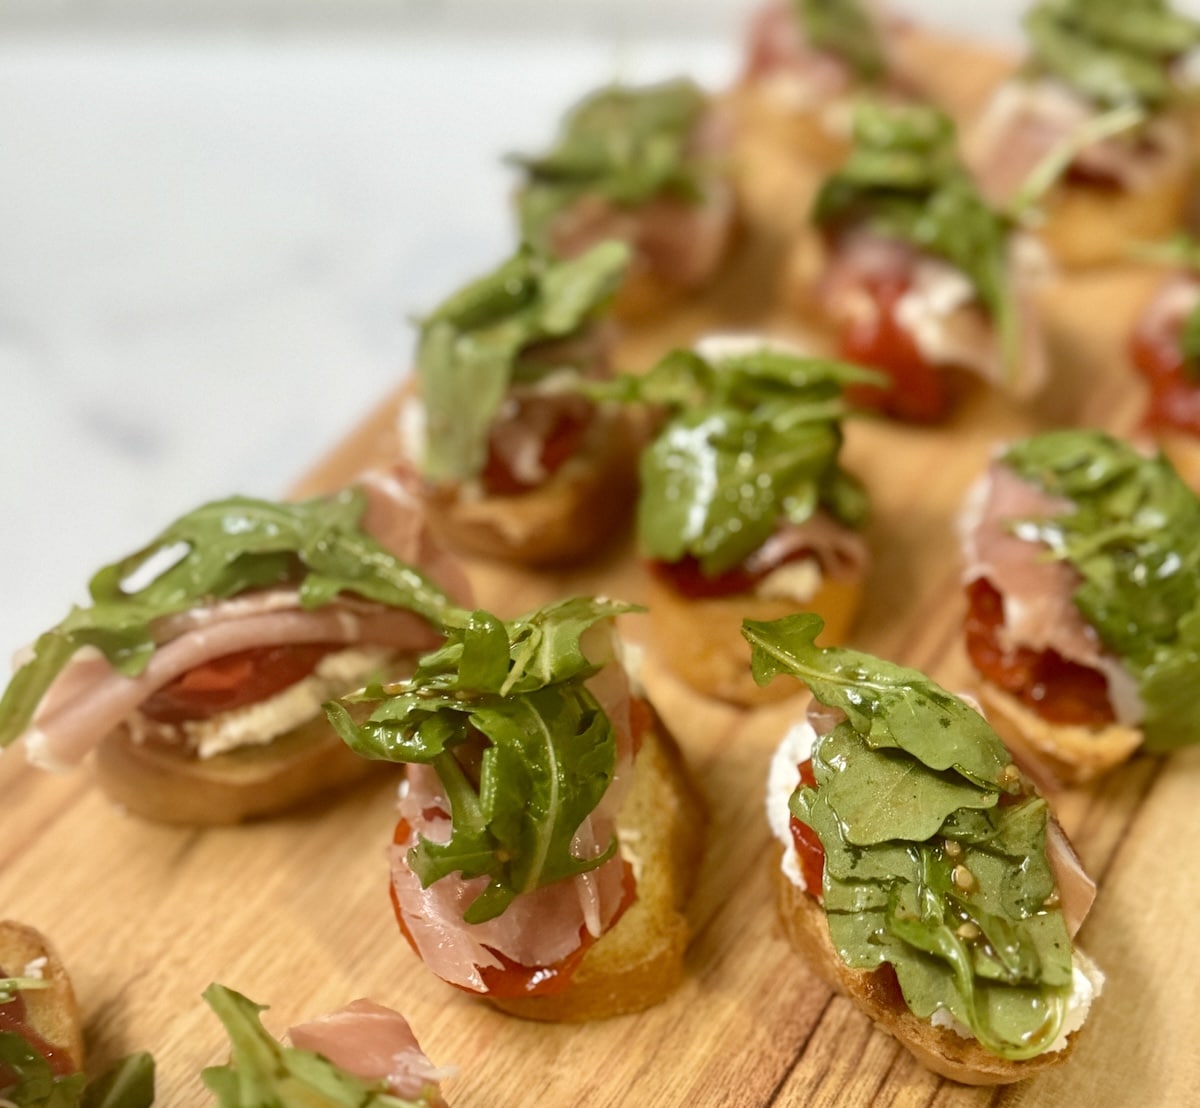 Goat cheese and prosciutto with tomato on toasts.